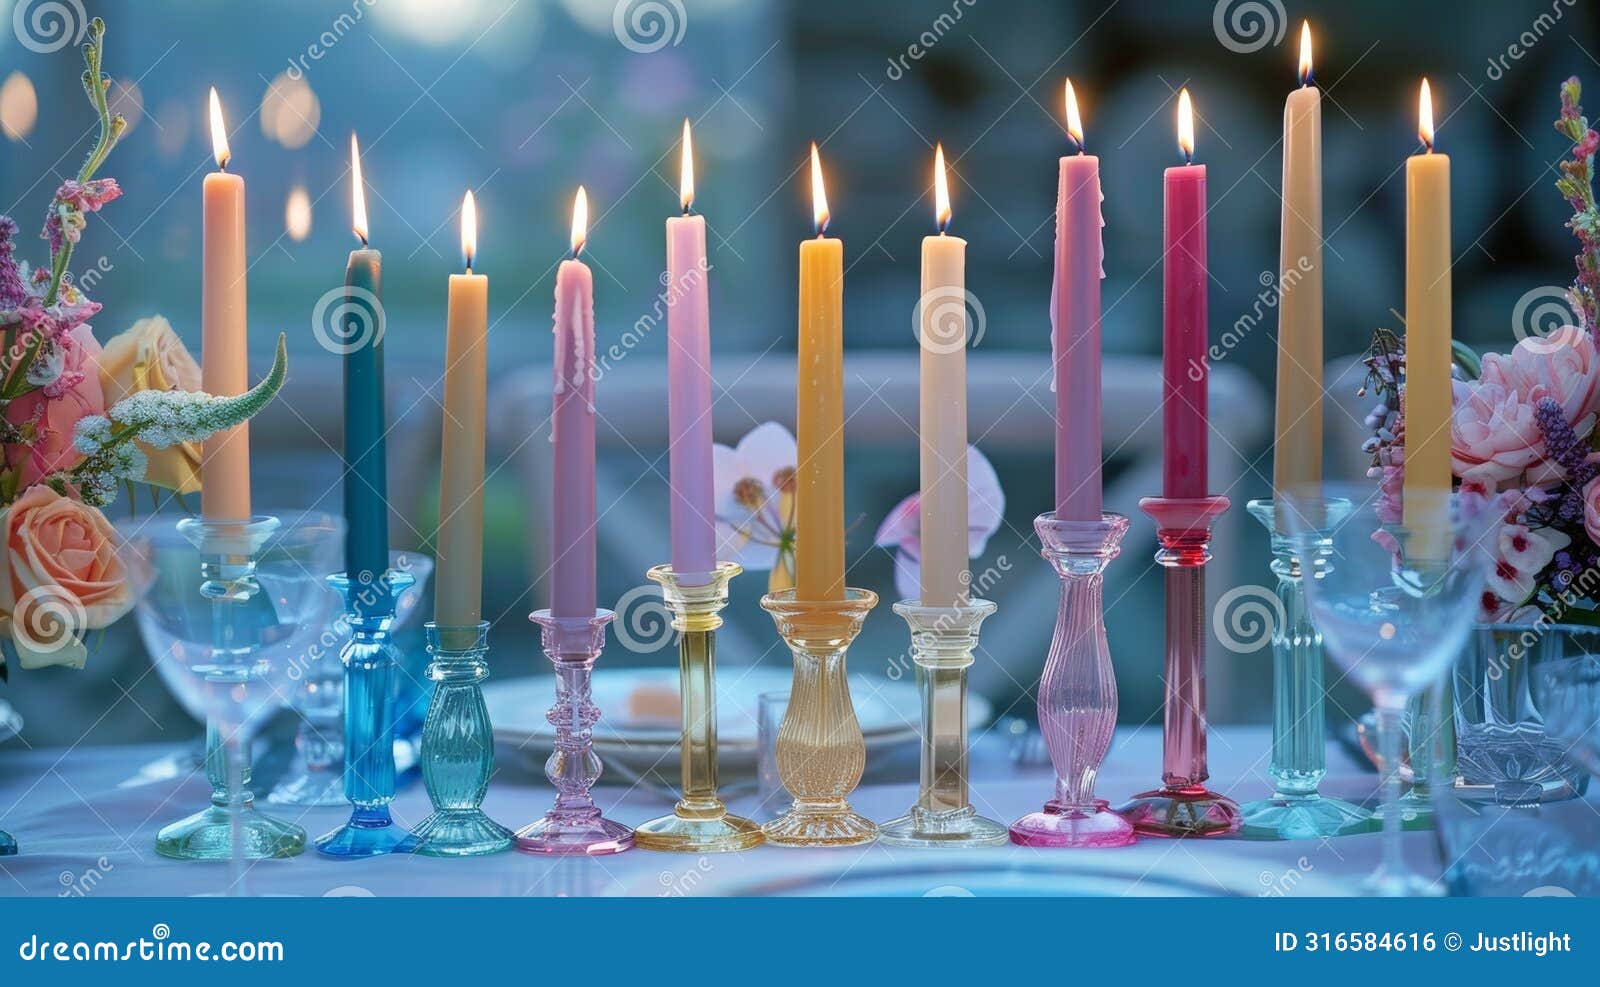 a collection of elegant taper candles in various jewel tones casting a romantic aura over a dinner table